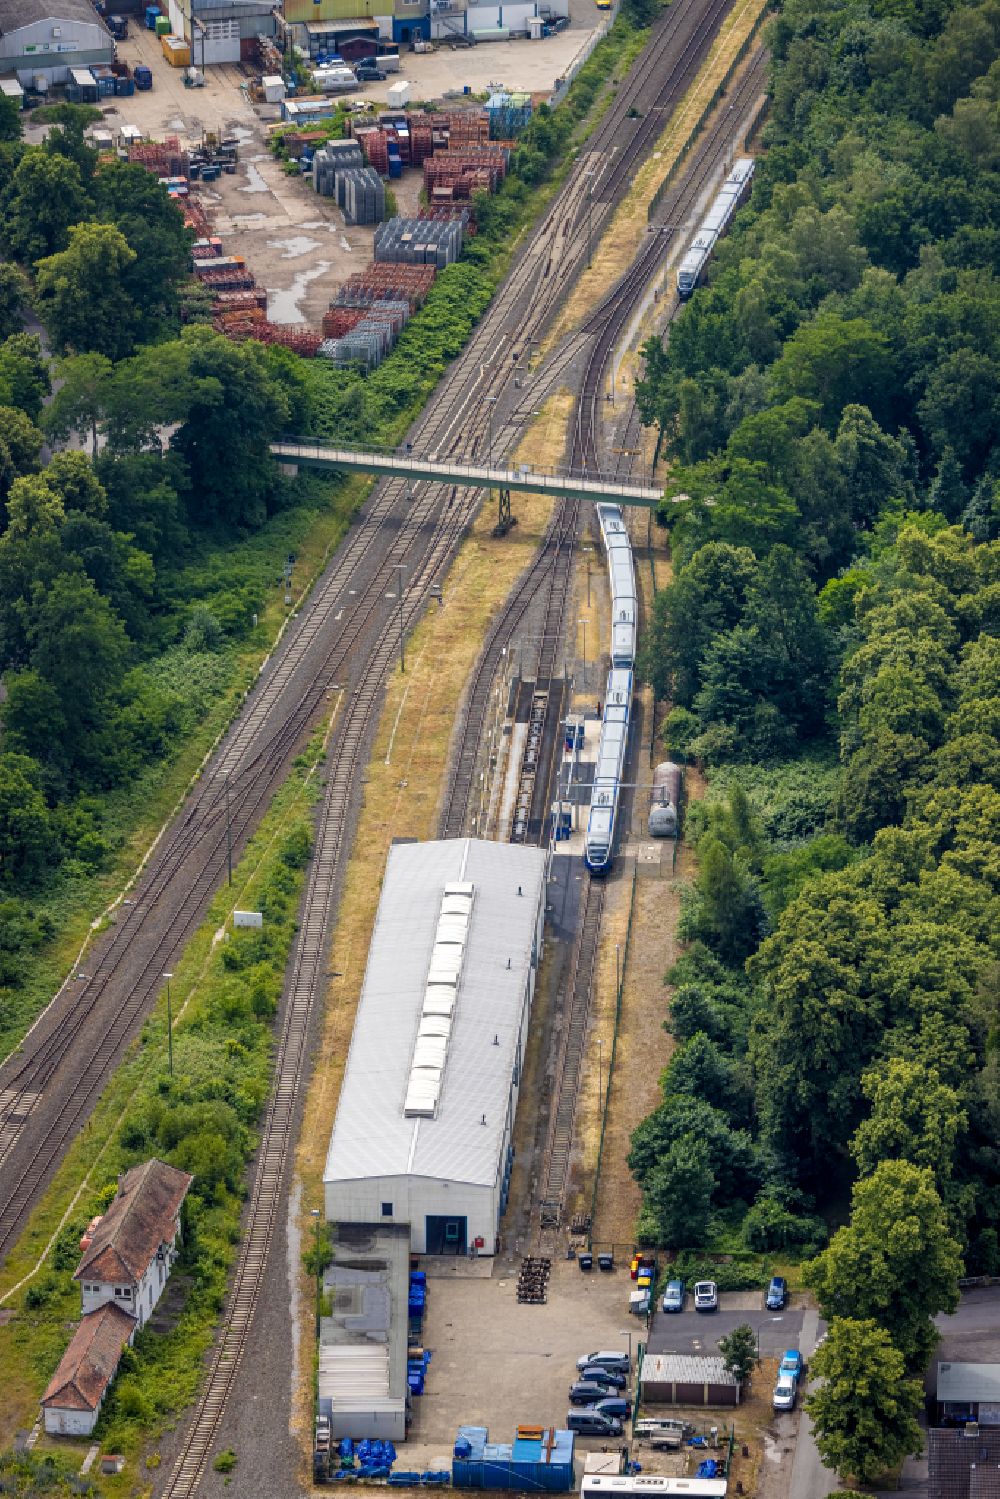 Aerial image Dorsten - Railway depot and repair shop, servicing and maintenance of passenger transport trains RheinRuhrbahn Betriebswerk in the district of Feldmark in Dorsten in the Ruhr area in the state of North Rhine-Westphalia, Germany